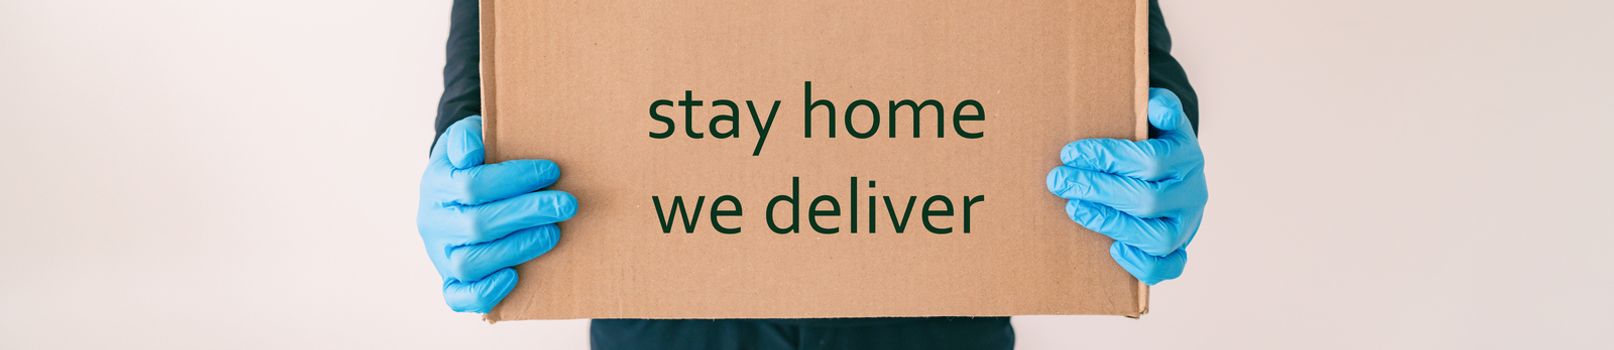 Home delivery with quote STAY HOME WE DELIVER on cardboard box banner. Food grocery delivered with gloves for COVID-19 quarantine from coronavirus social distancing. man giving purchase.